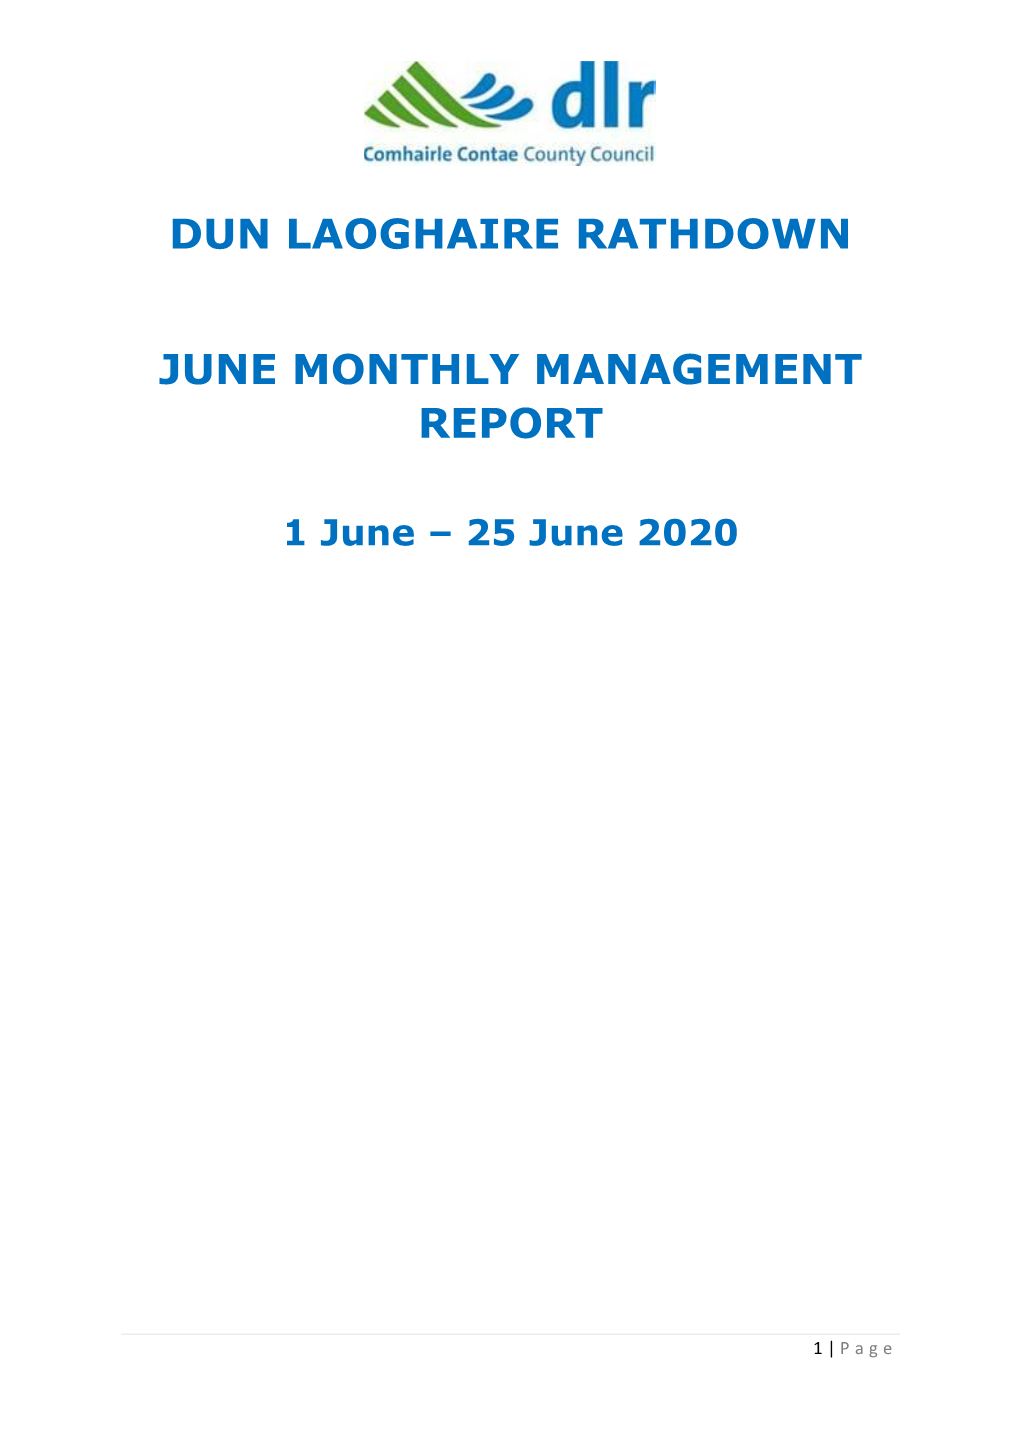 June 2020 Monthly Management Report